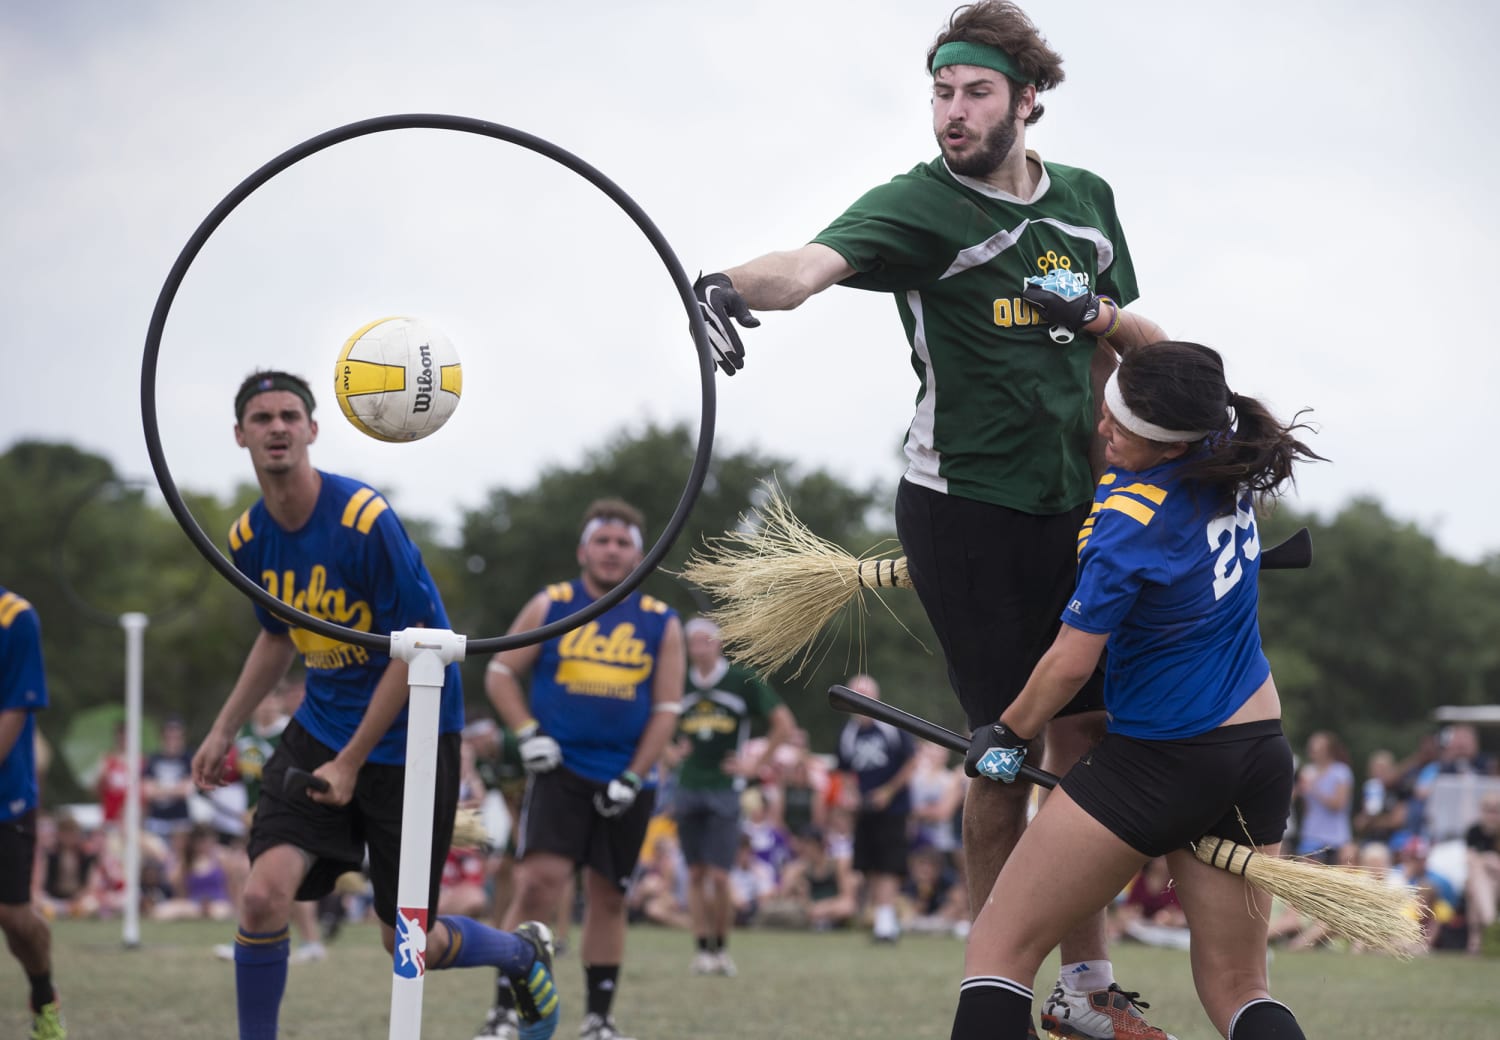 ‘Harry Potter’ sport quidditch to change name, citing J.K. Rowling’s ‘anti-trans positions’